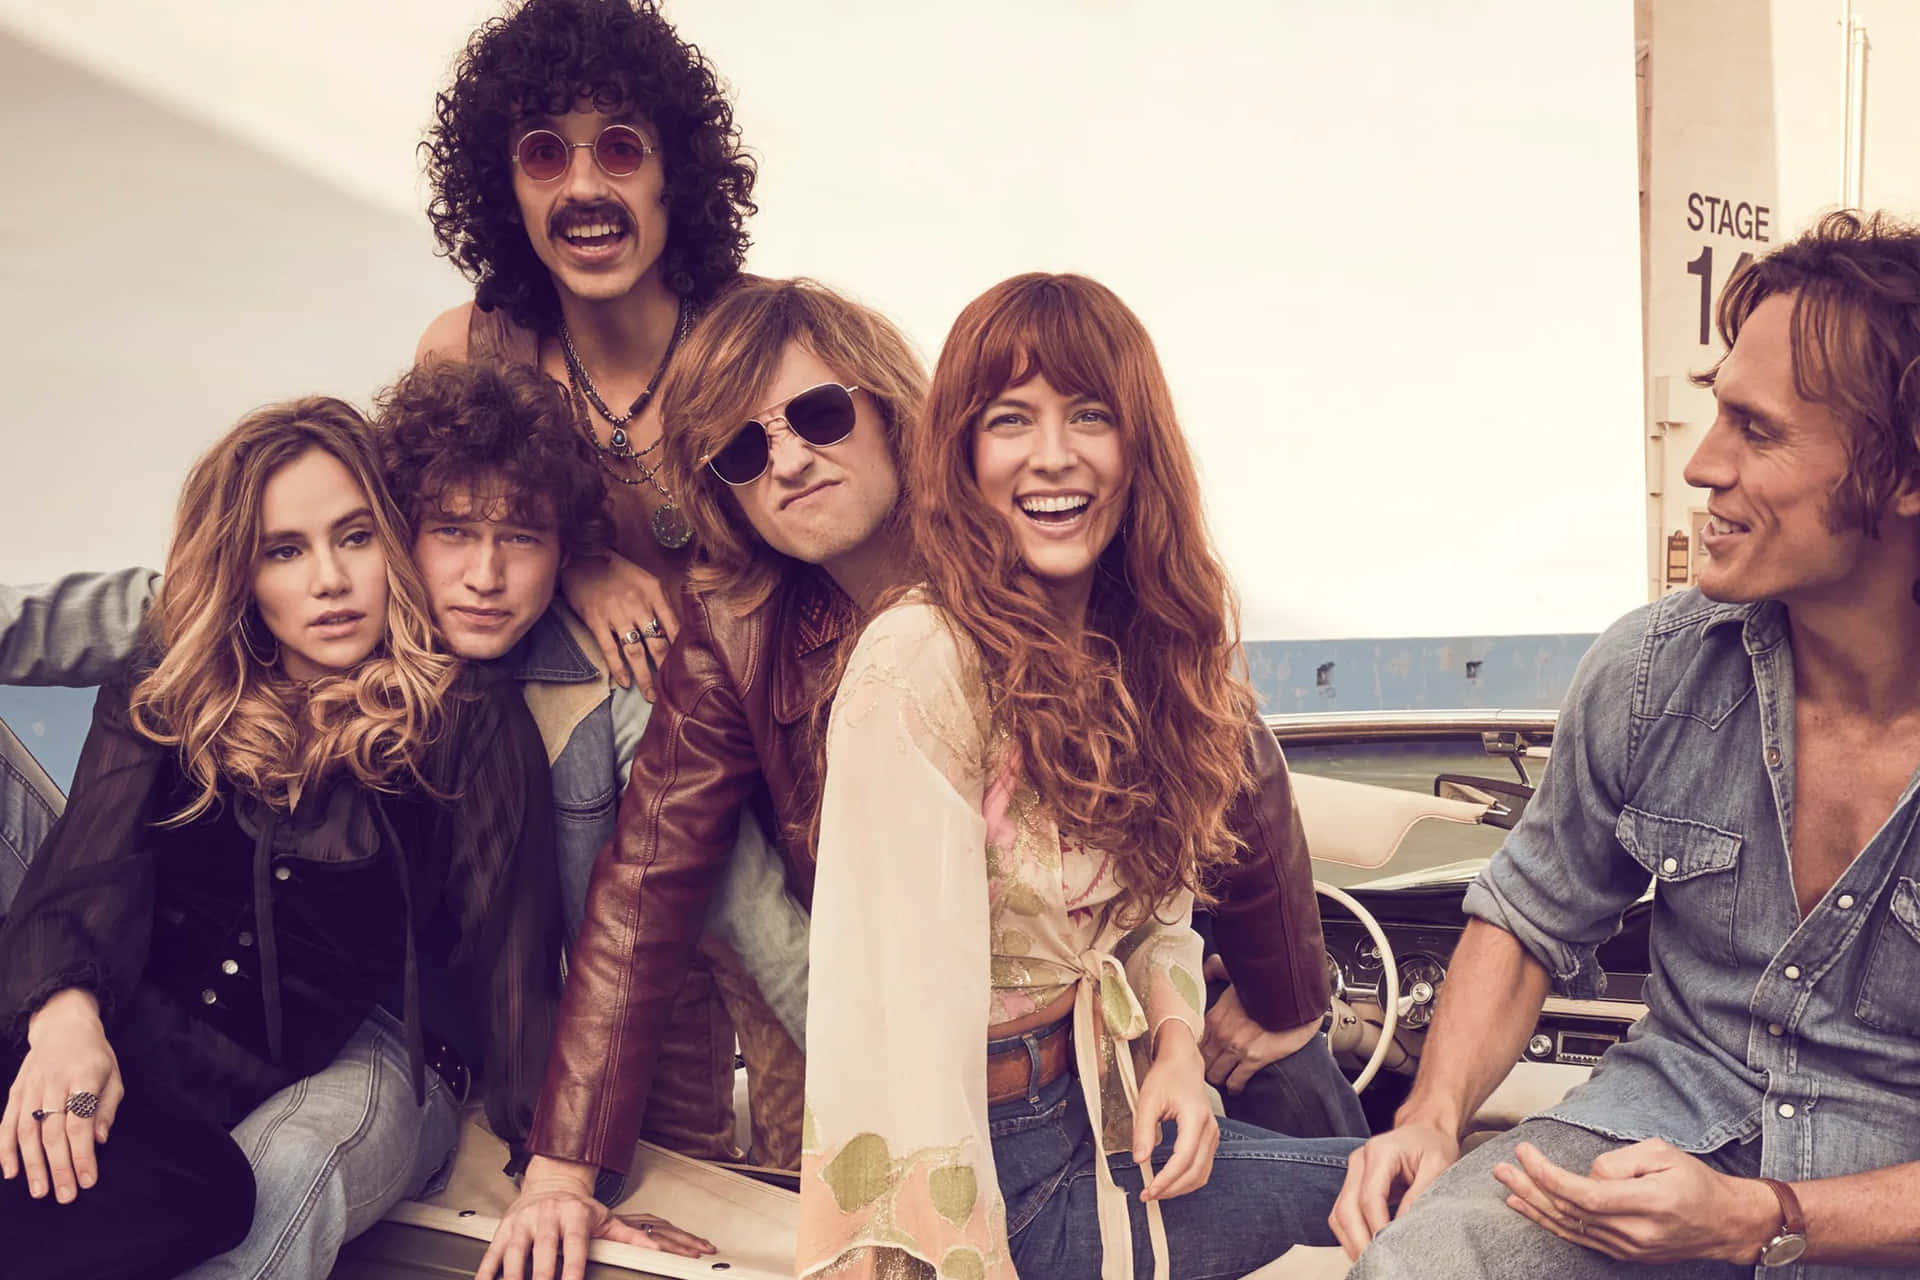 Get to know Daisy Jones&The Six; a 70s rock band re-defining love, drama and rock music. Wallpaper